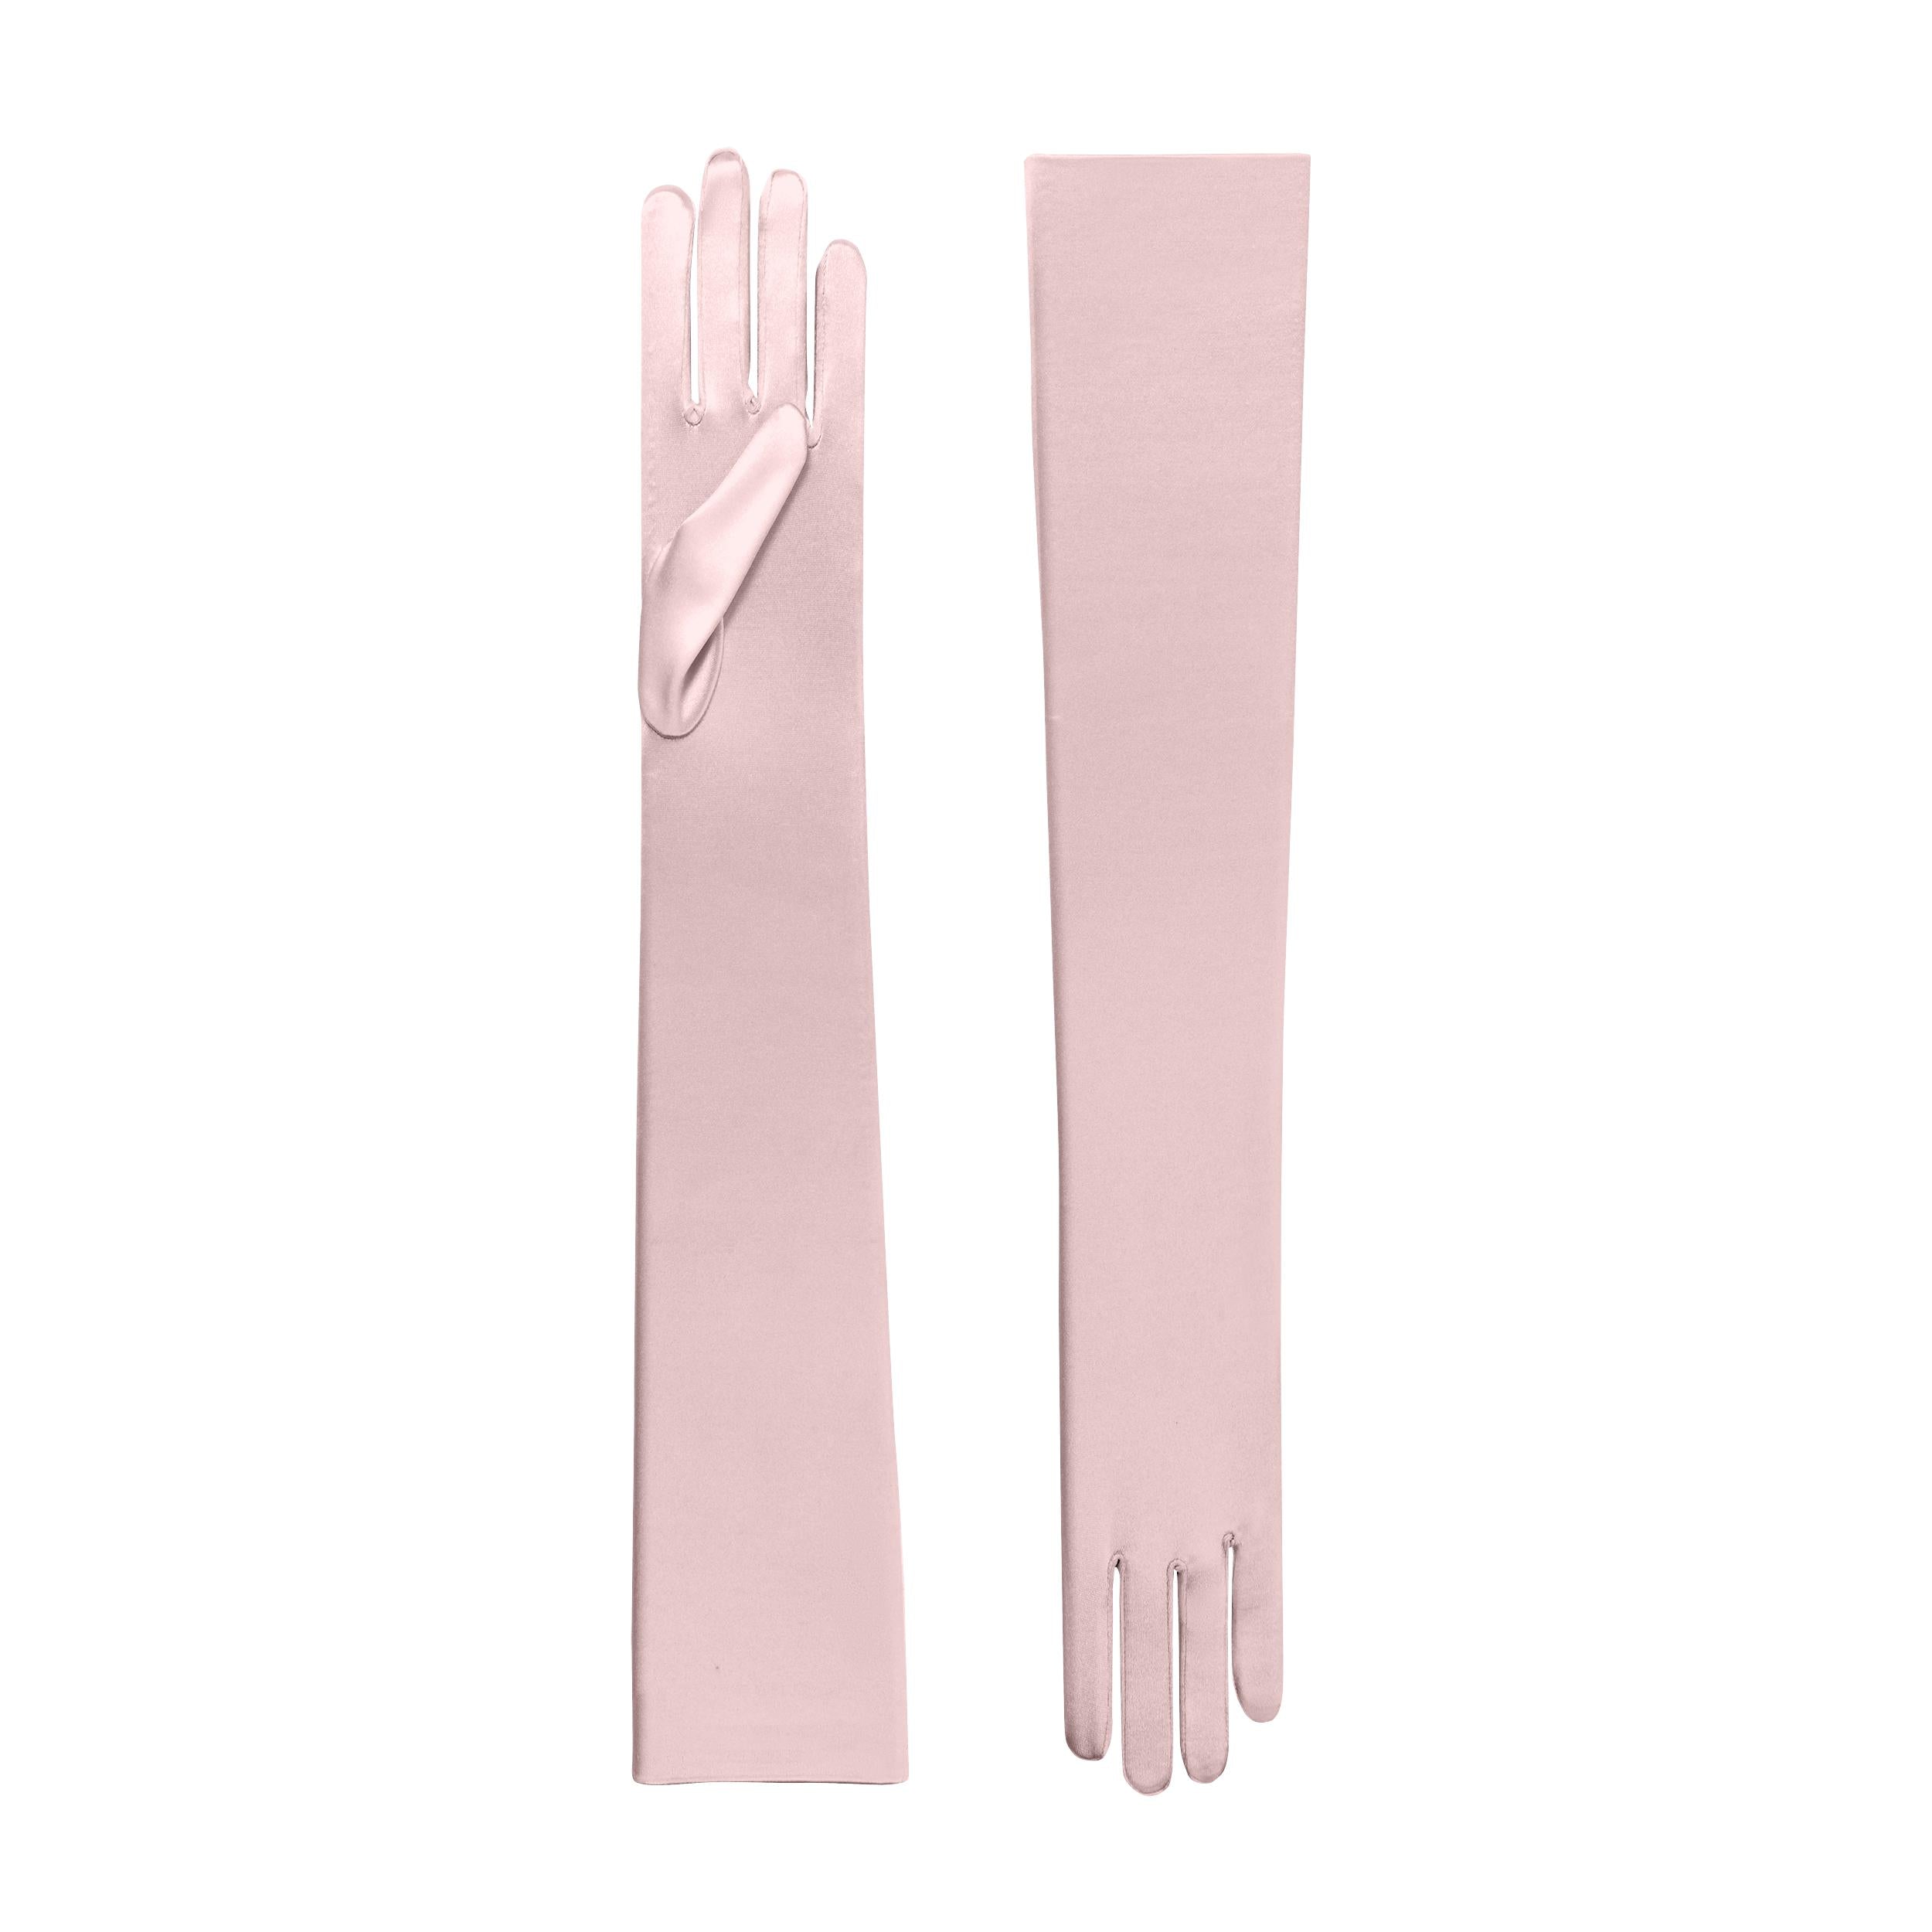 Cornelia James - Pink Satin Opera Gloves - Hermione - Size Large (8½) - Made to Measure Evening Gloves by Cornelia James product